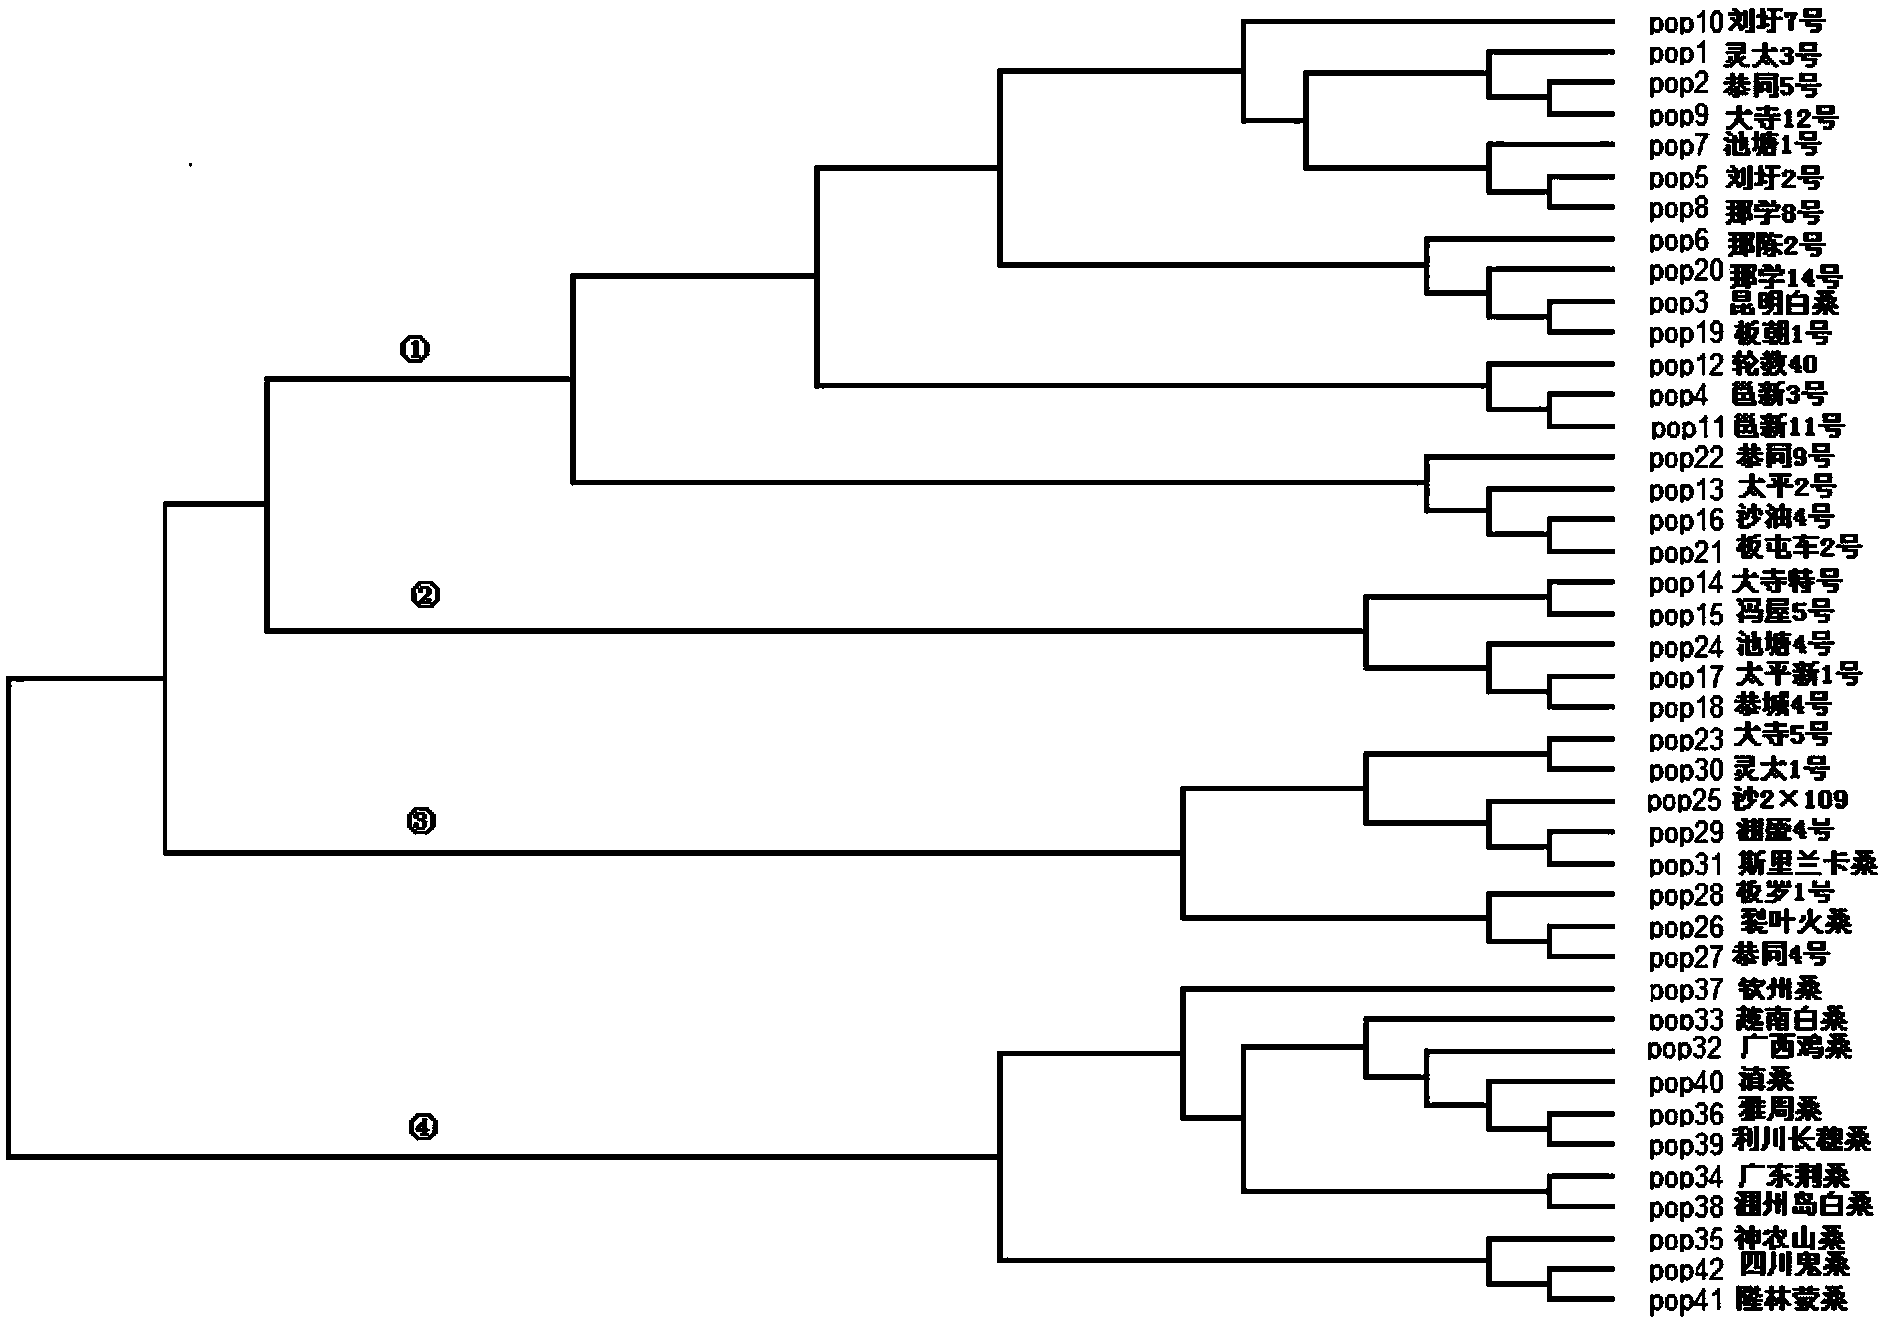 Method for evaluating genetic relationship DNA (deoxyribonucleic acid) molecules of mulberry variety